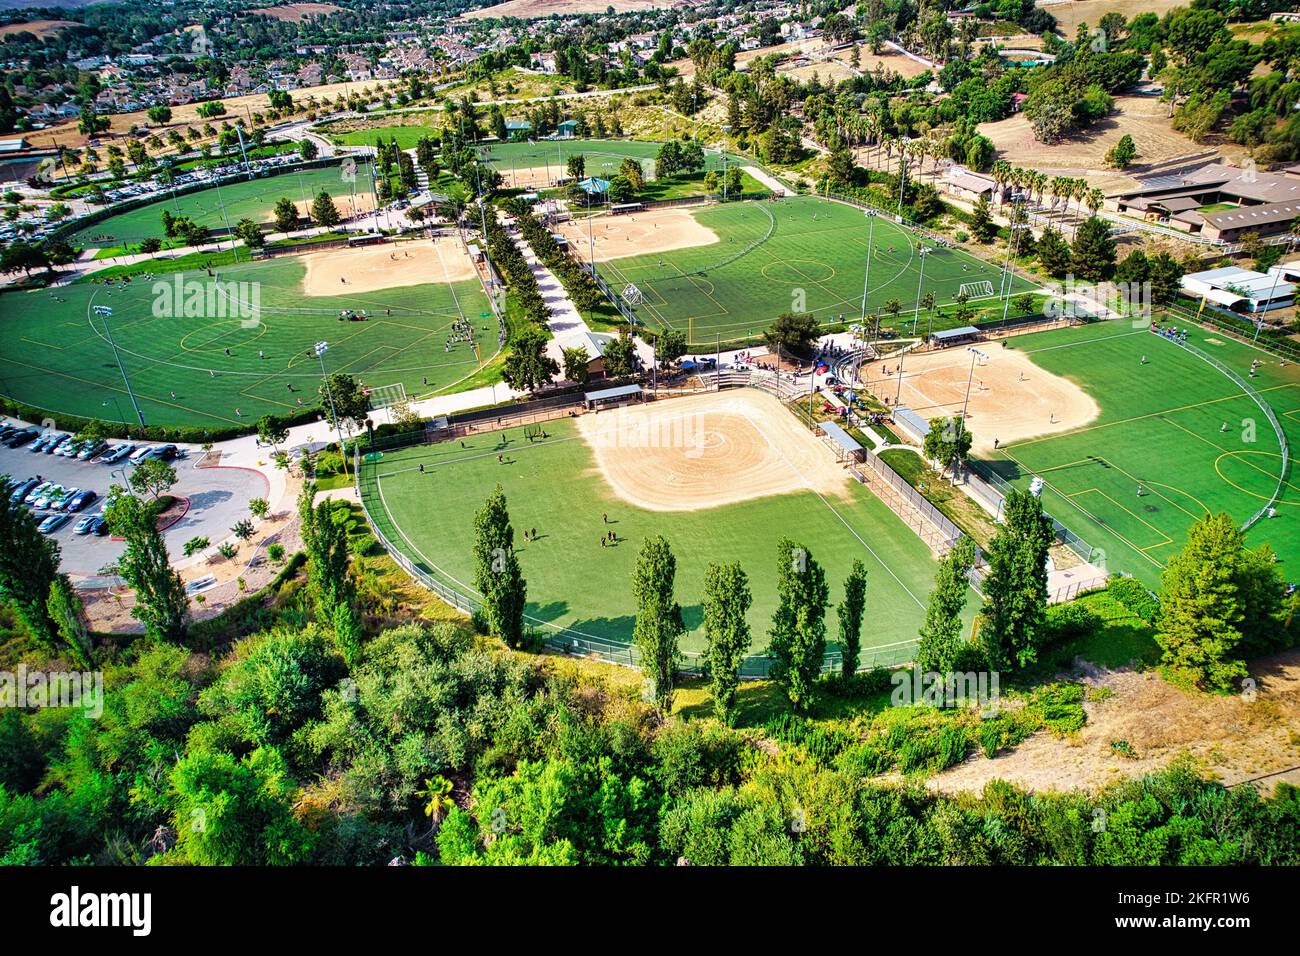 A drone view of a multi-use playfield with football and softball diamonds Stock Photo